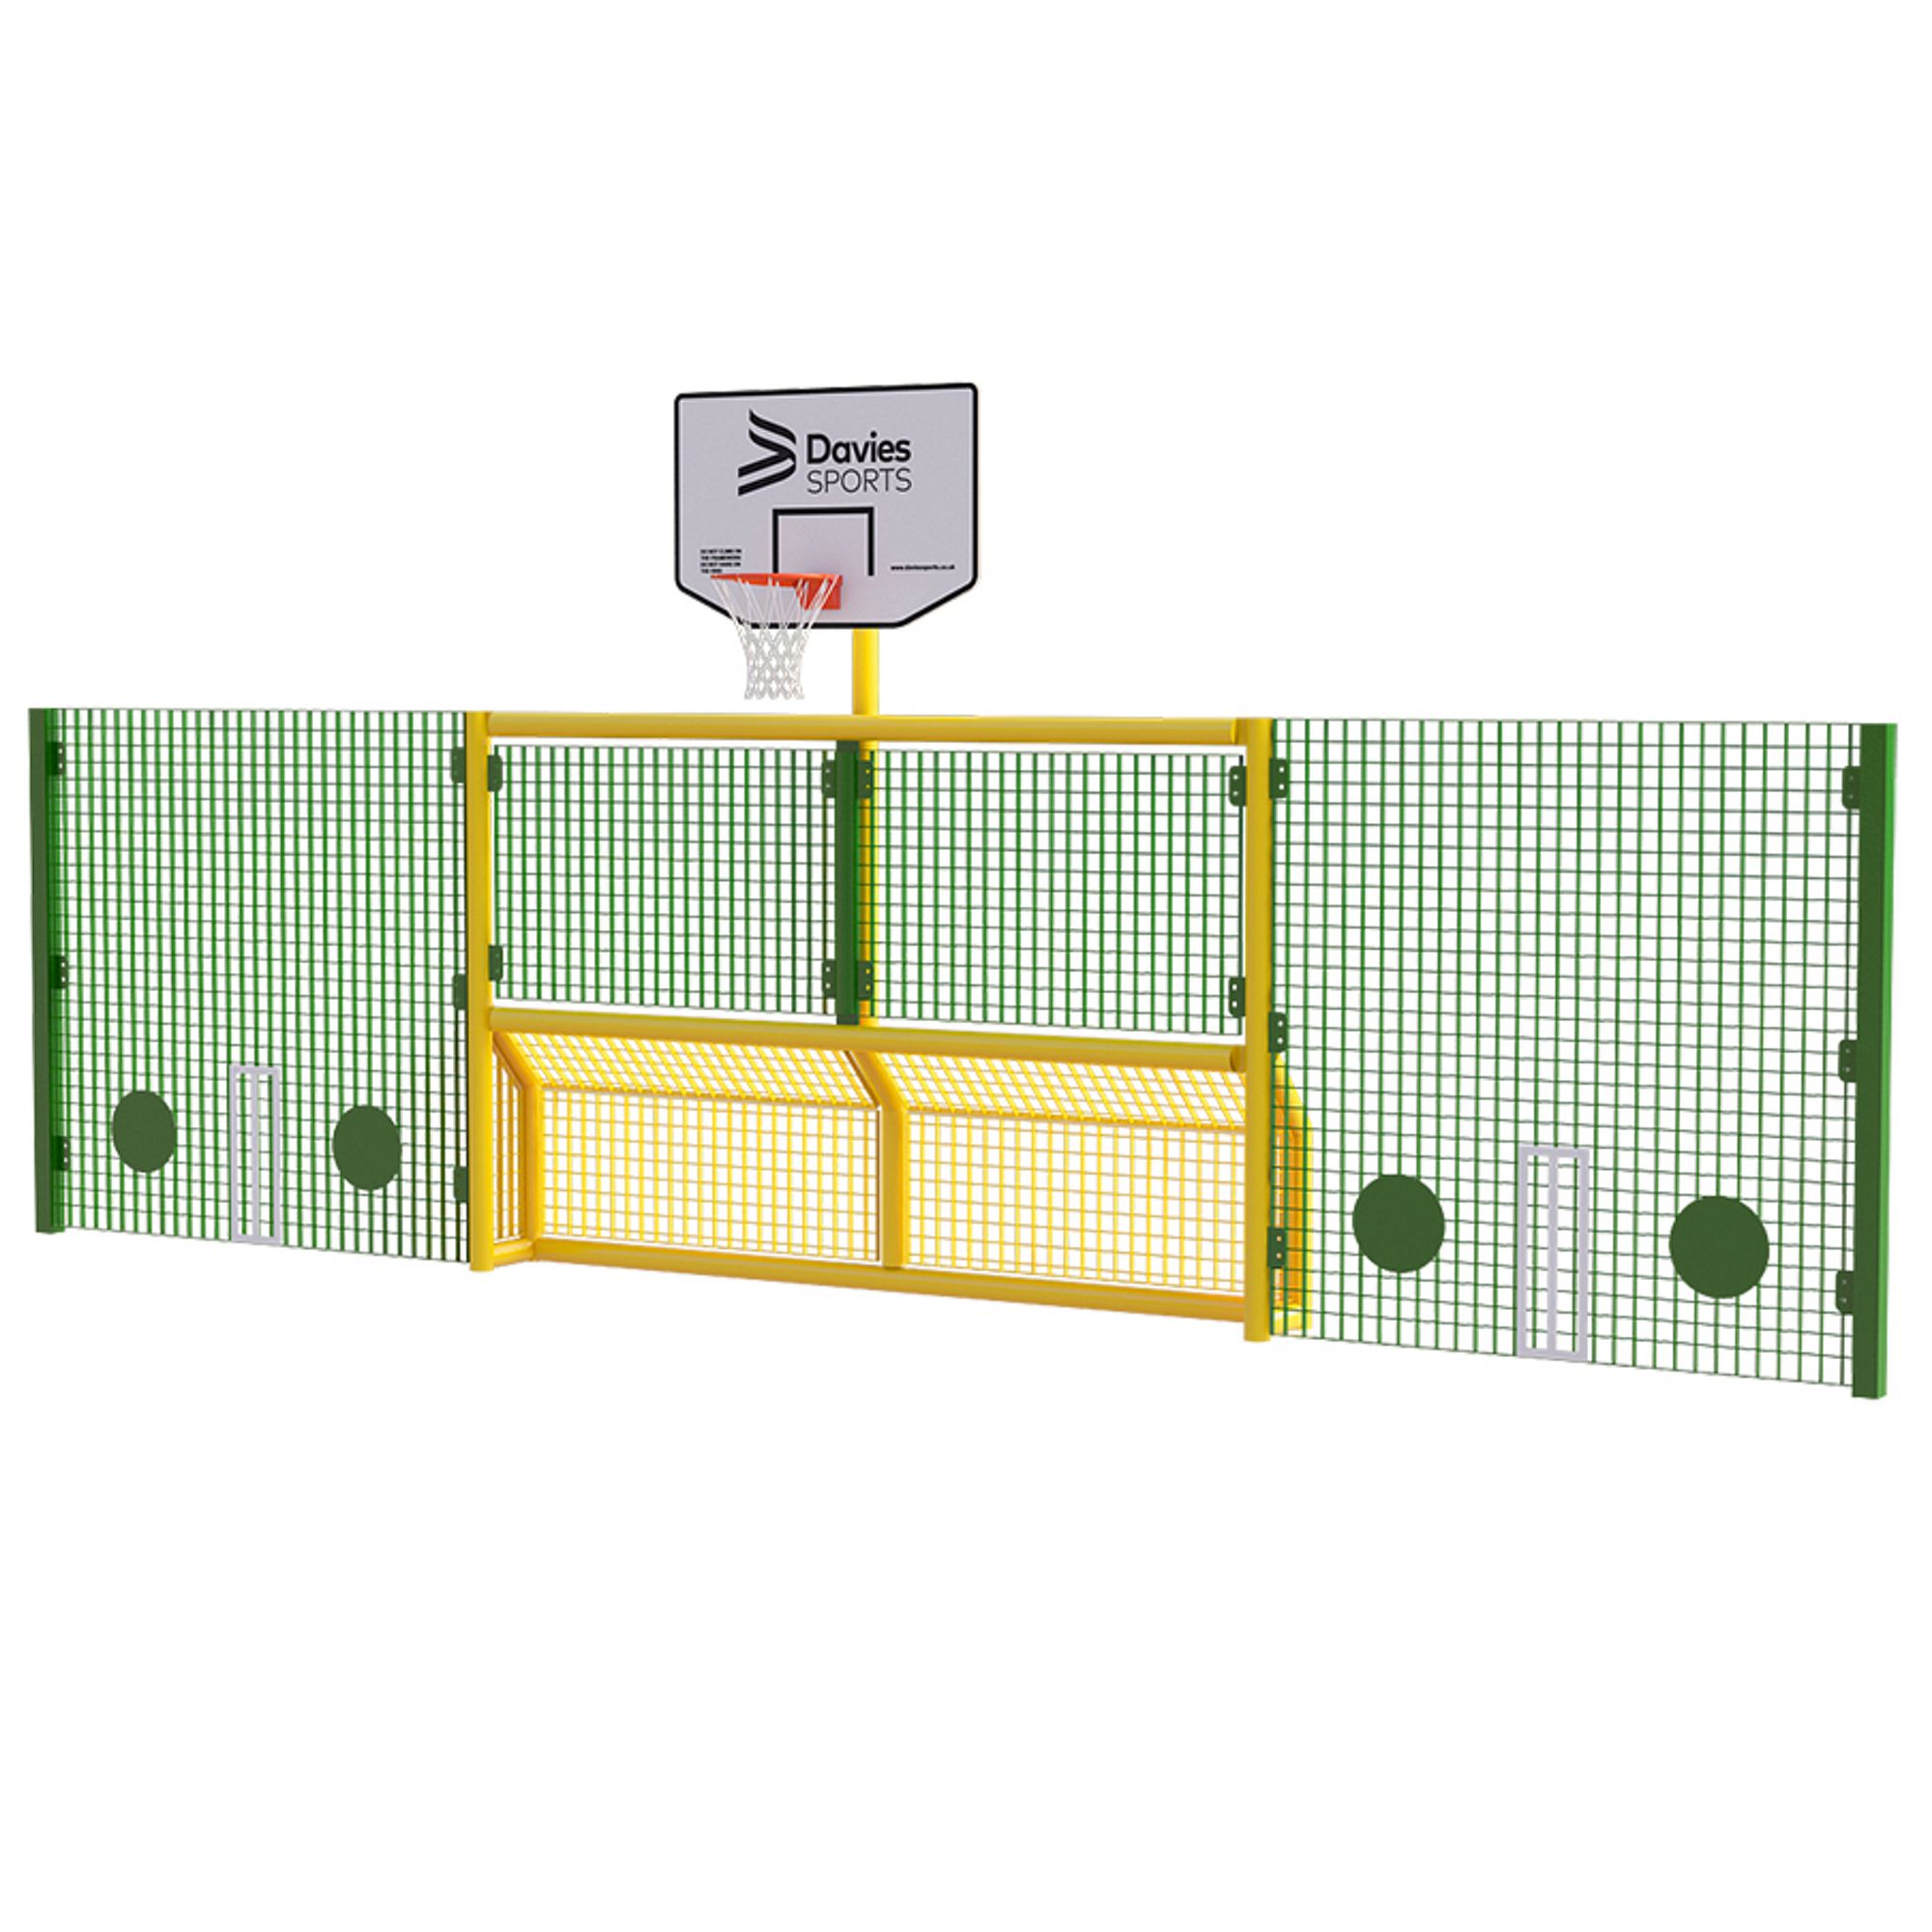 Primary High Sides Bball Yel Frame Green